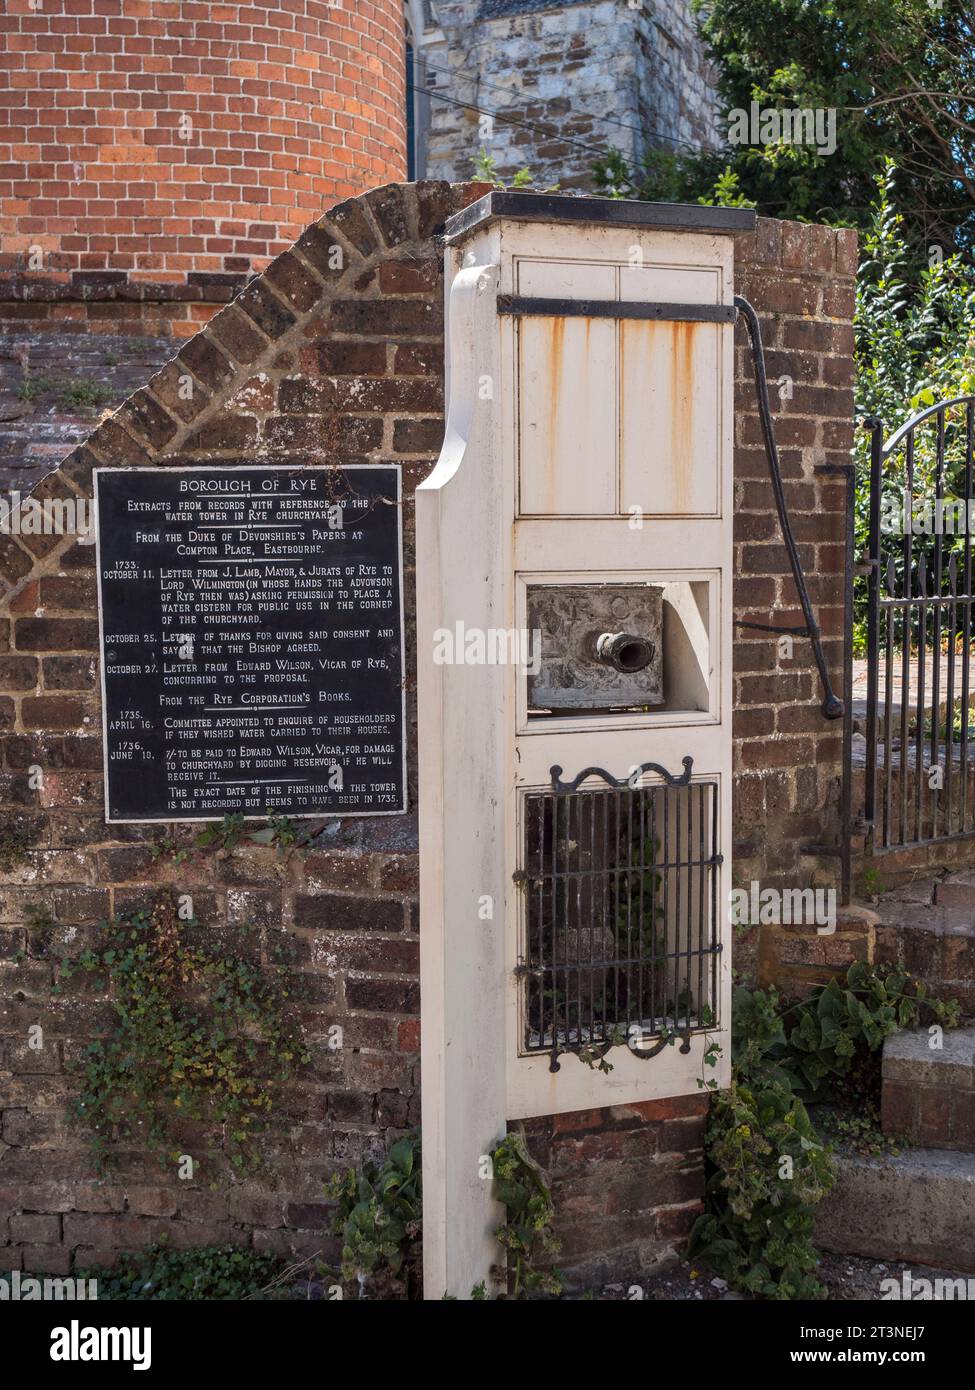 Plaque marking the water tower in the churchyard of the Church of Saint Mary, in Rye, East Sussex, UK. Stock Photo